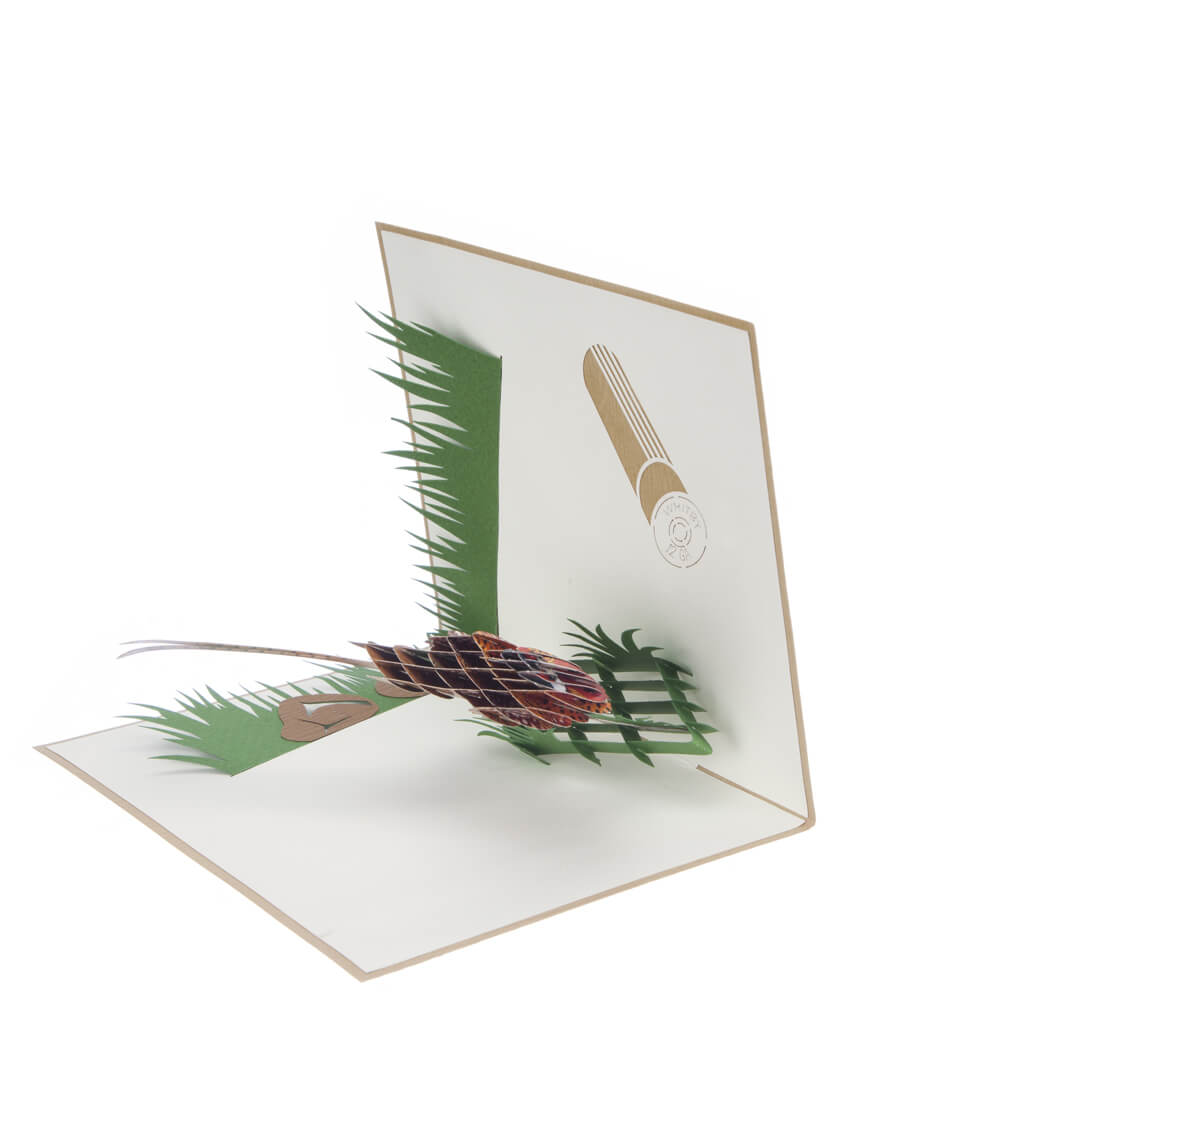 Pheasant "Takes Some Beating" Pop Up Card